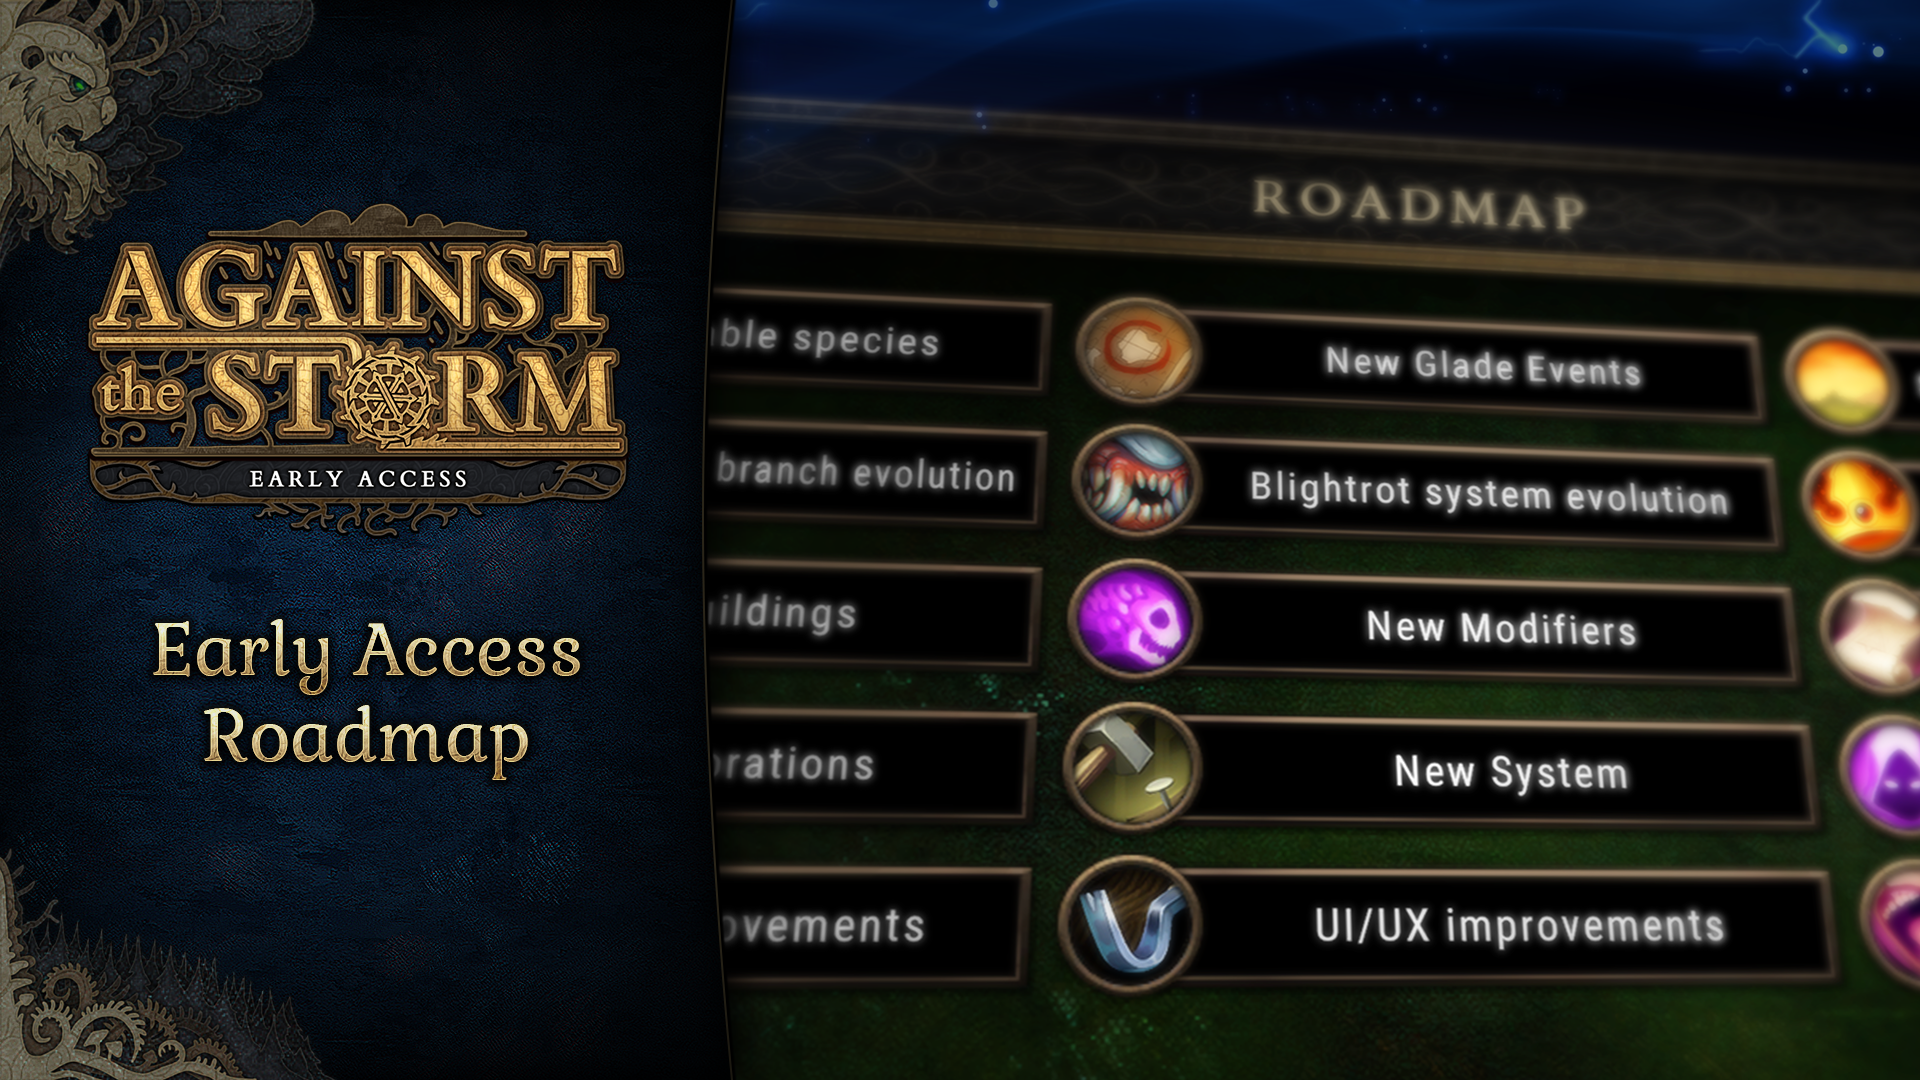 AGAINST THE STORM First Impression: Strategy, Stress, And